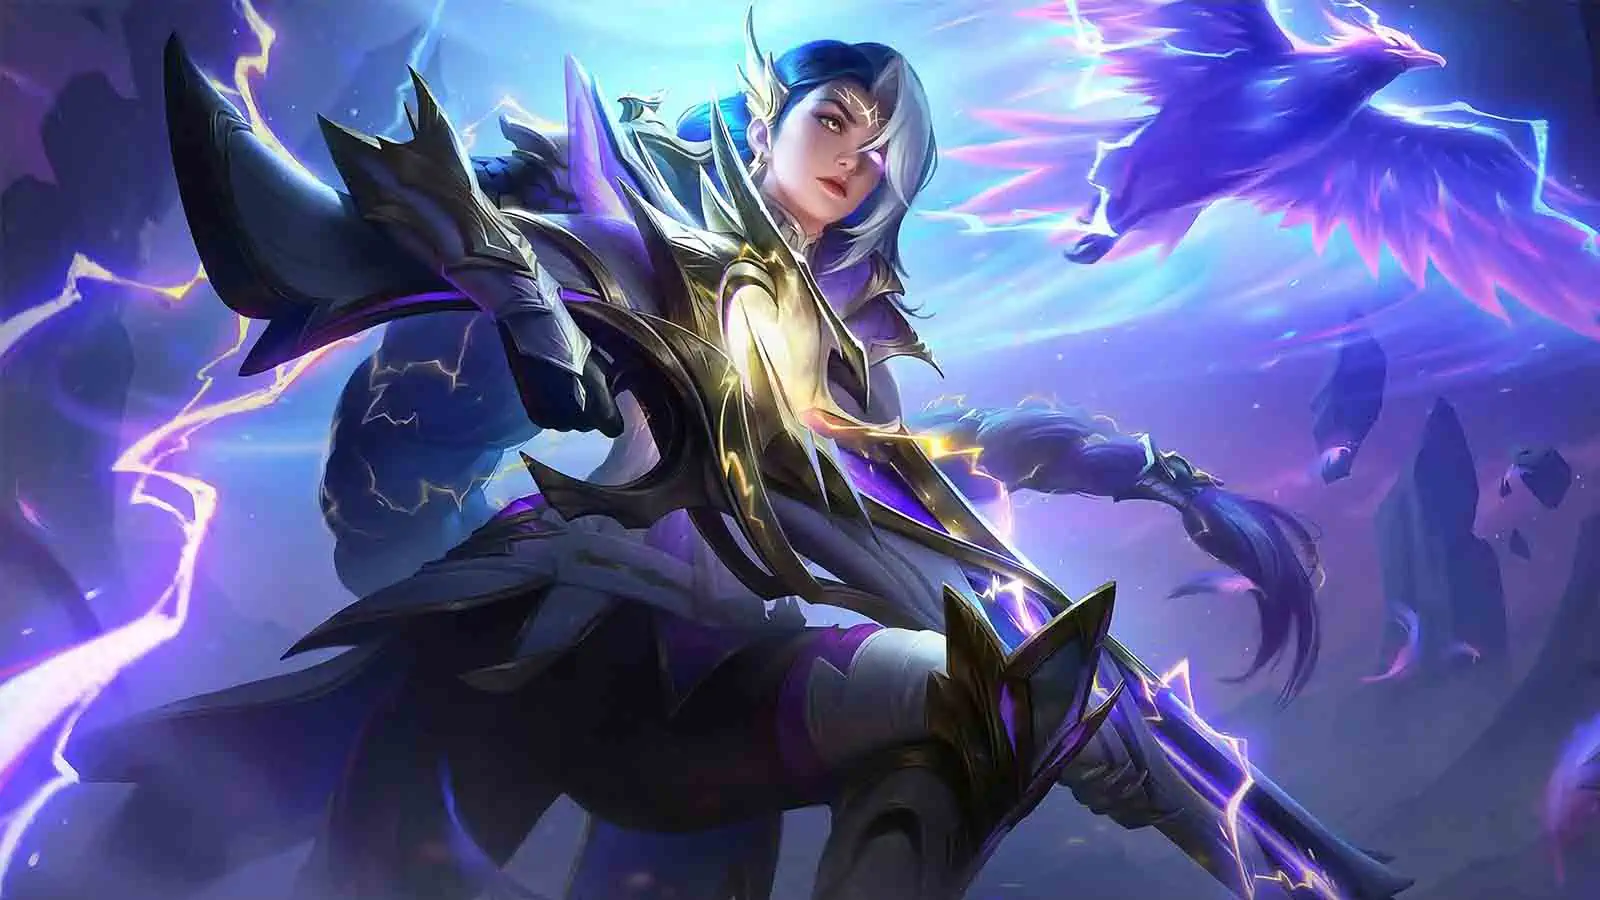 Hawk-eyed Sniper Lesley will make you beg for mercy | ONE Esports